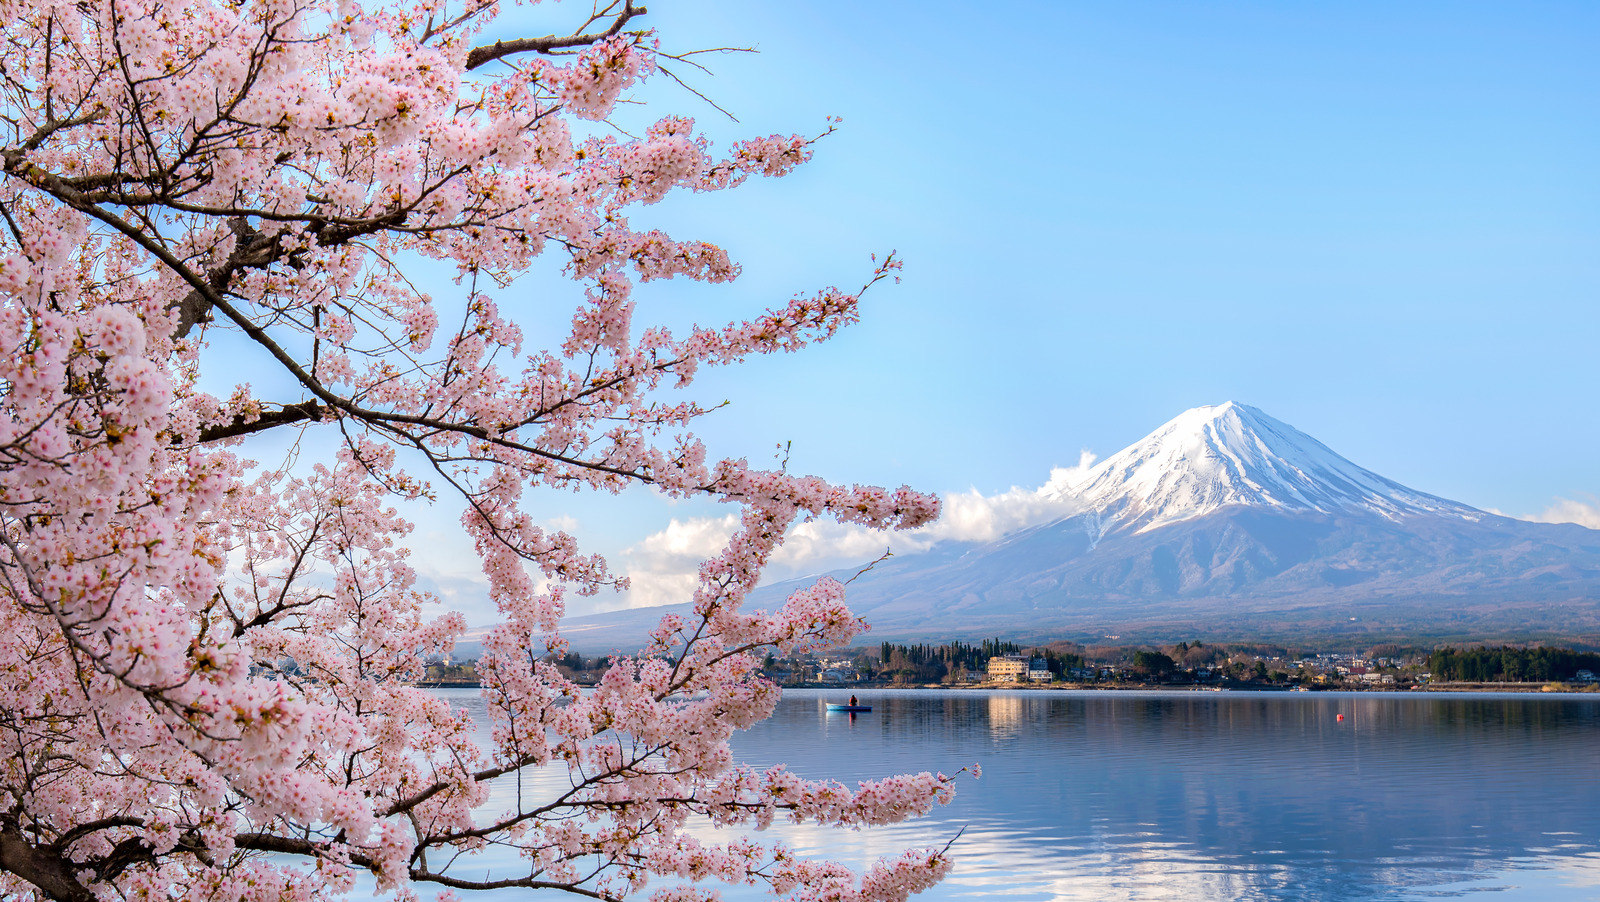 https://www.explore.com/img/gallery/where-to-see-beautiful-cherry-blossoms-around-the-world/l-intro-1667778429.jpg